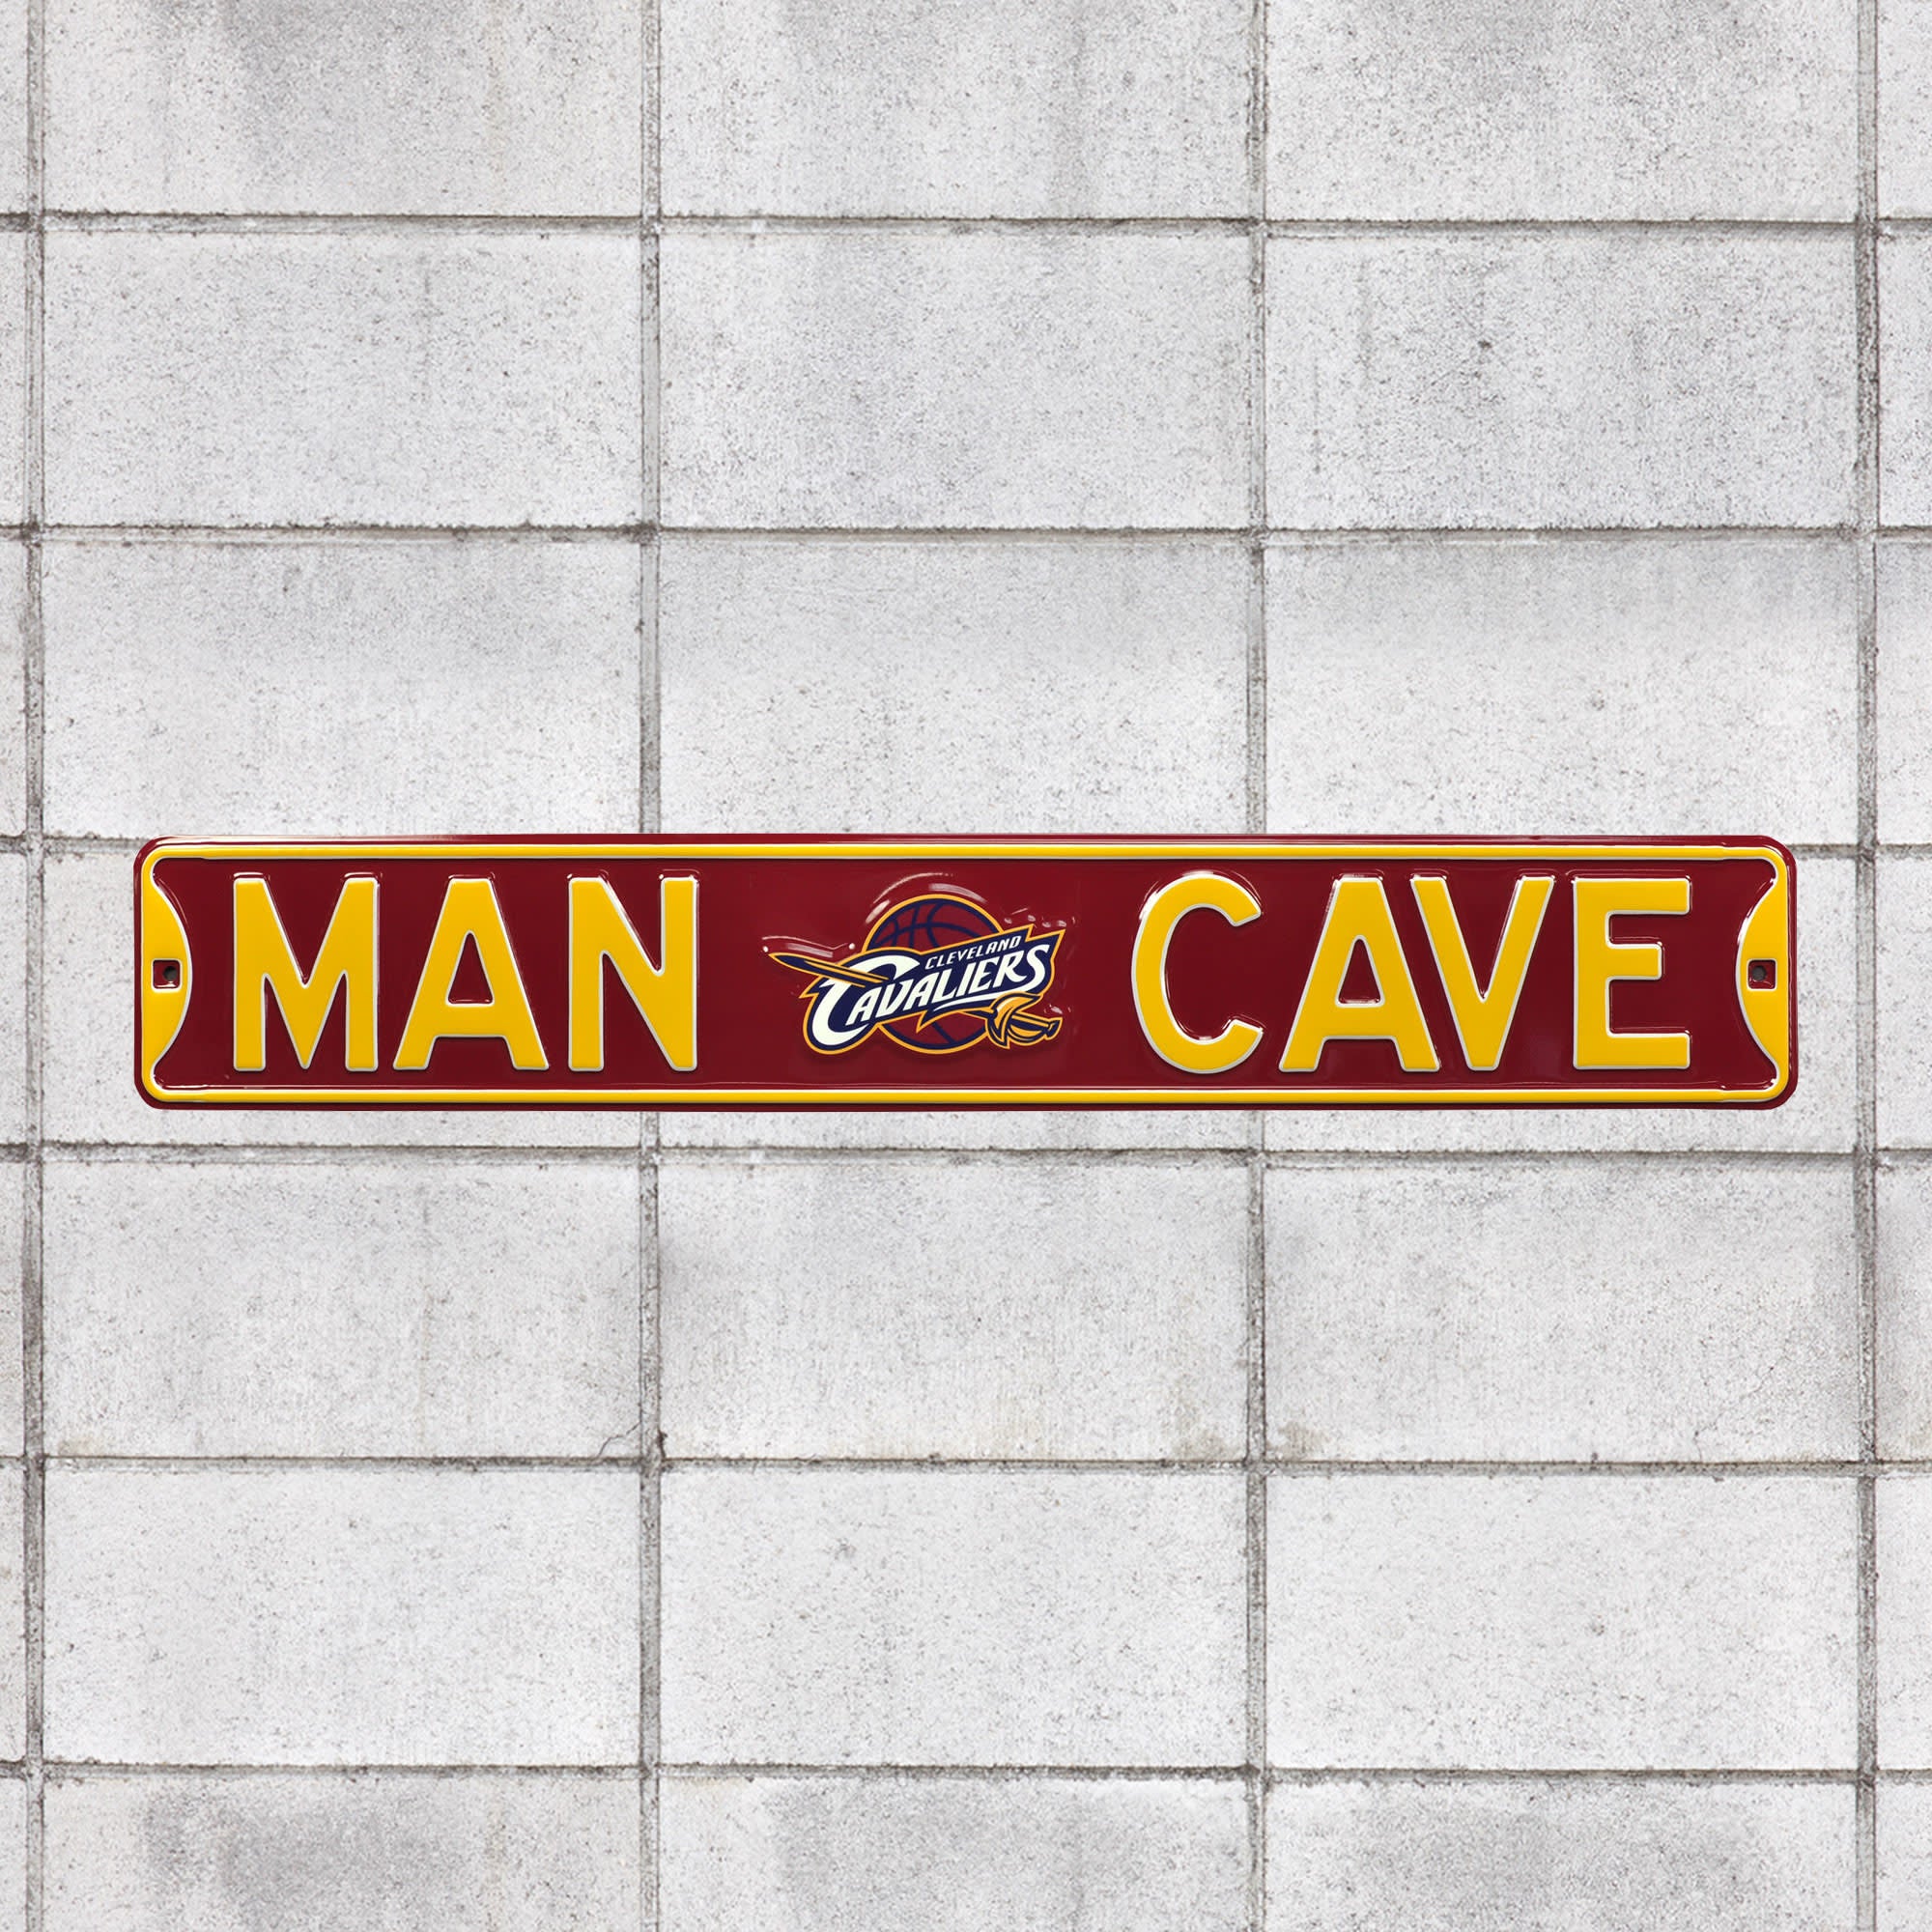 Cleveland Cavaliers: Man Cave - Officially Licensed NBA Metal Street Sign 36.0"W x 6.0"H by Fathead | 100% Steel